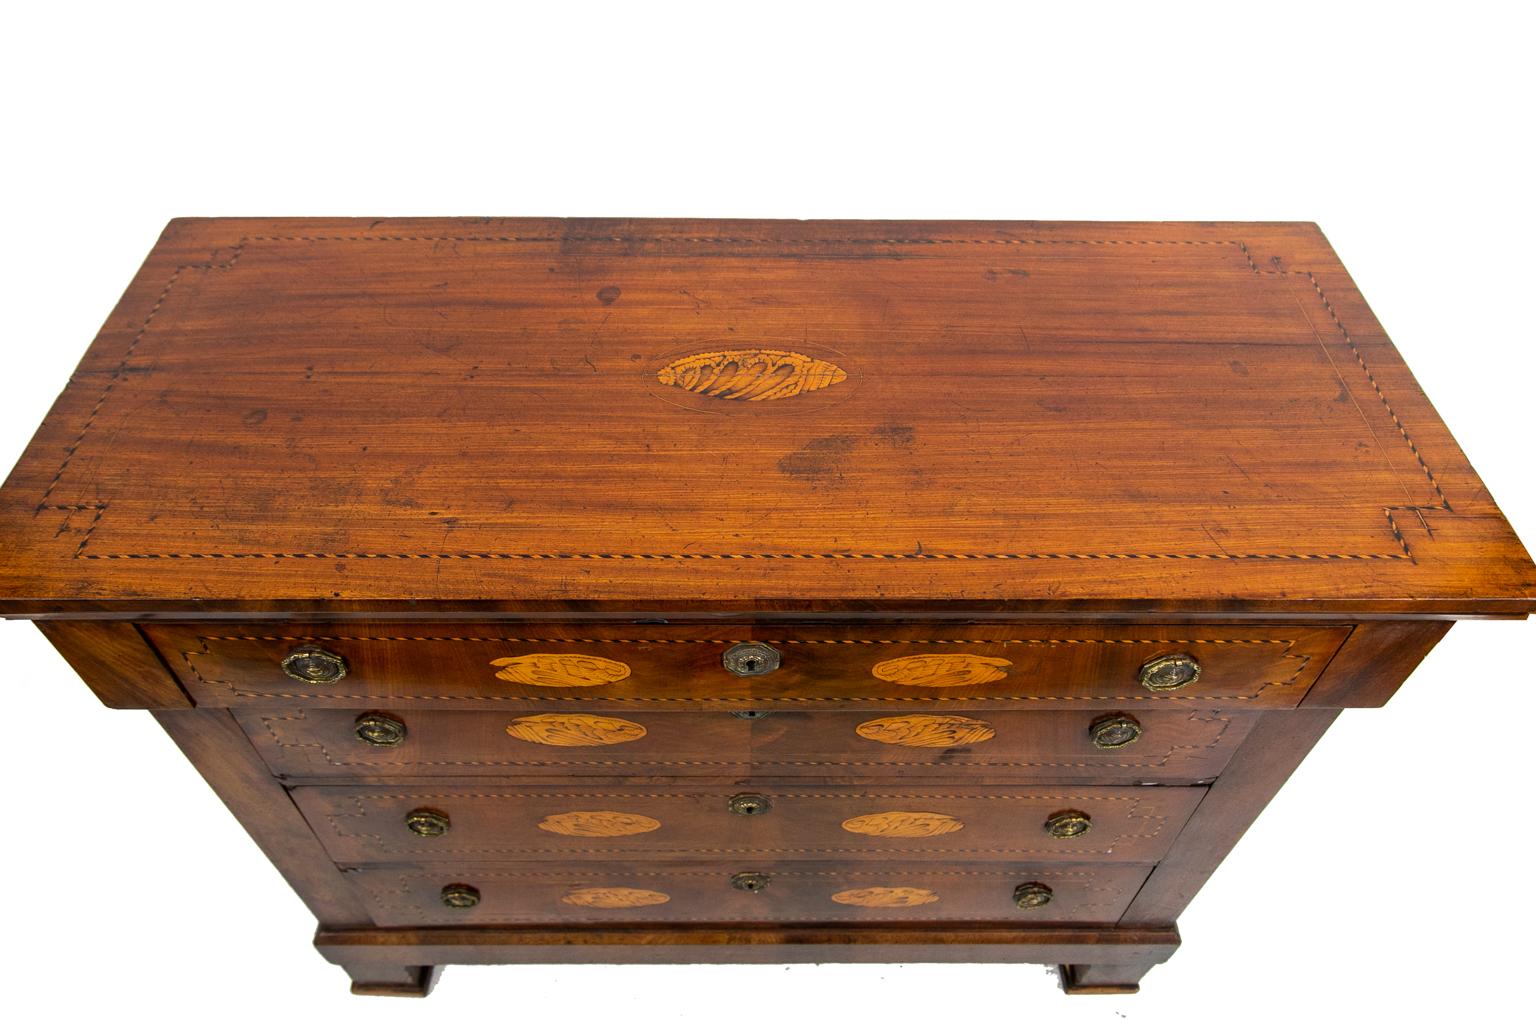 Inlaid French four-drawer chest, with the top and drawers inlaid with ebony and boxwood barber pole inlay, also featuring bookmatched crotch mahogany veneers and double conch shell inlays. The lower drawers and top have interlaced boxwood string